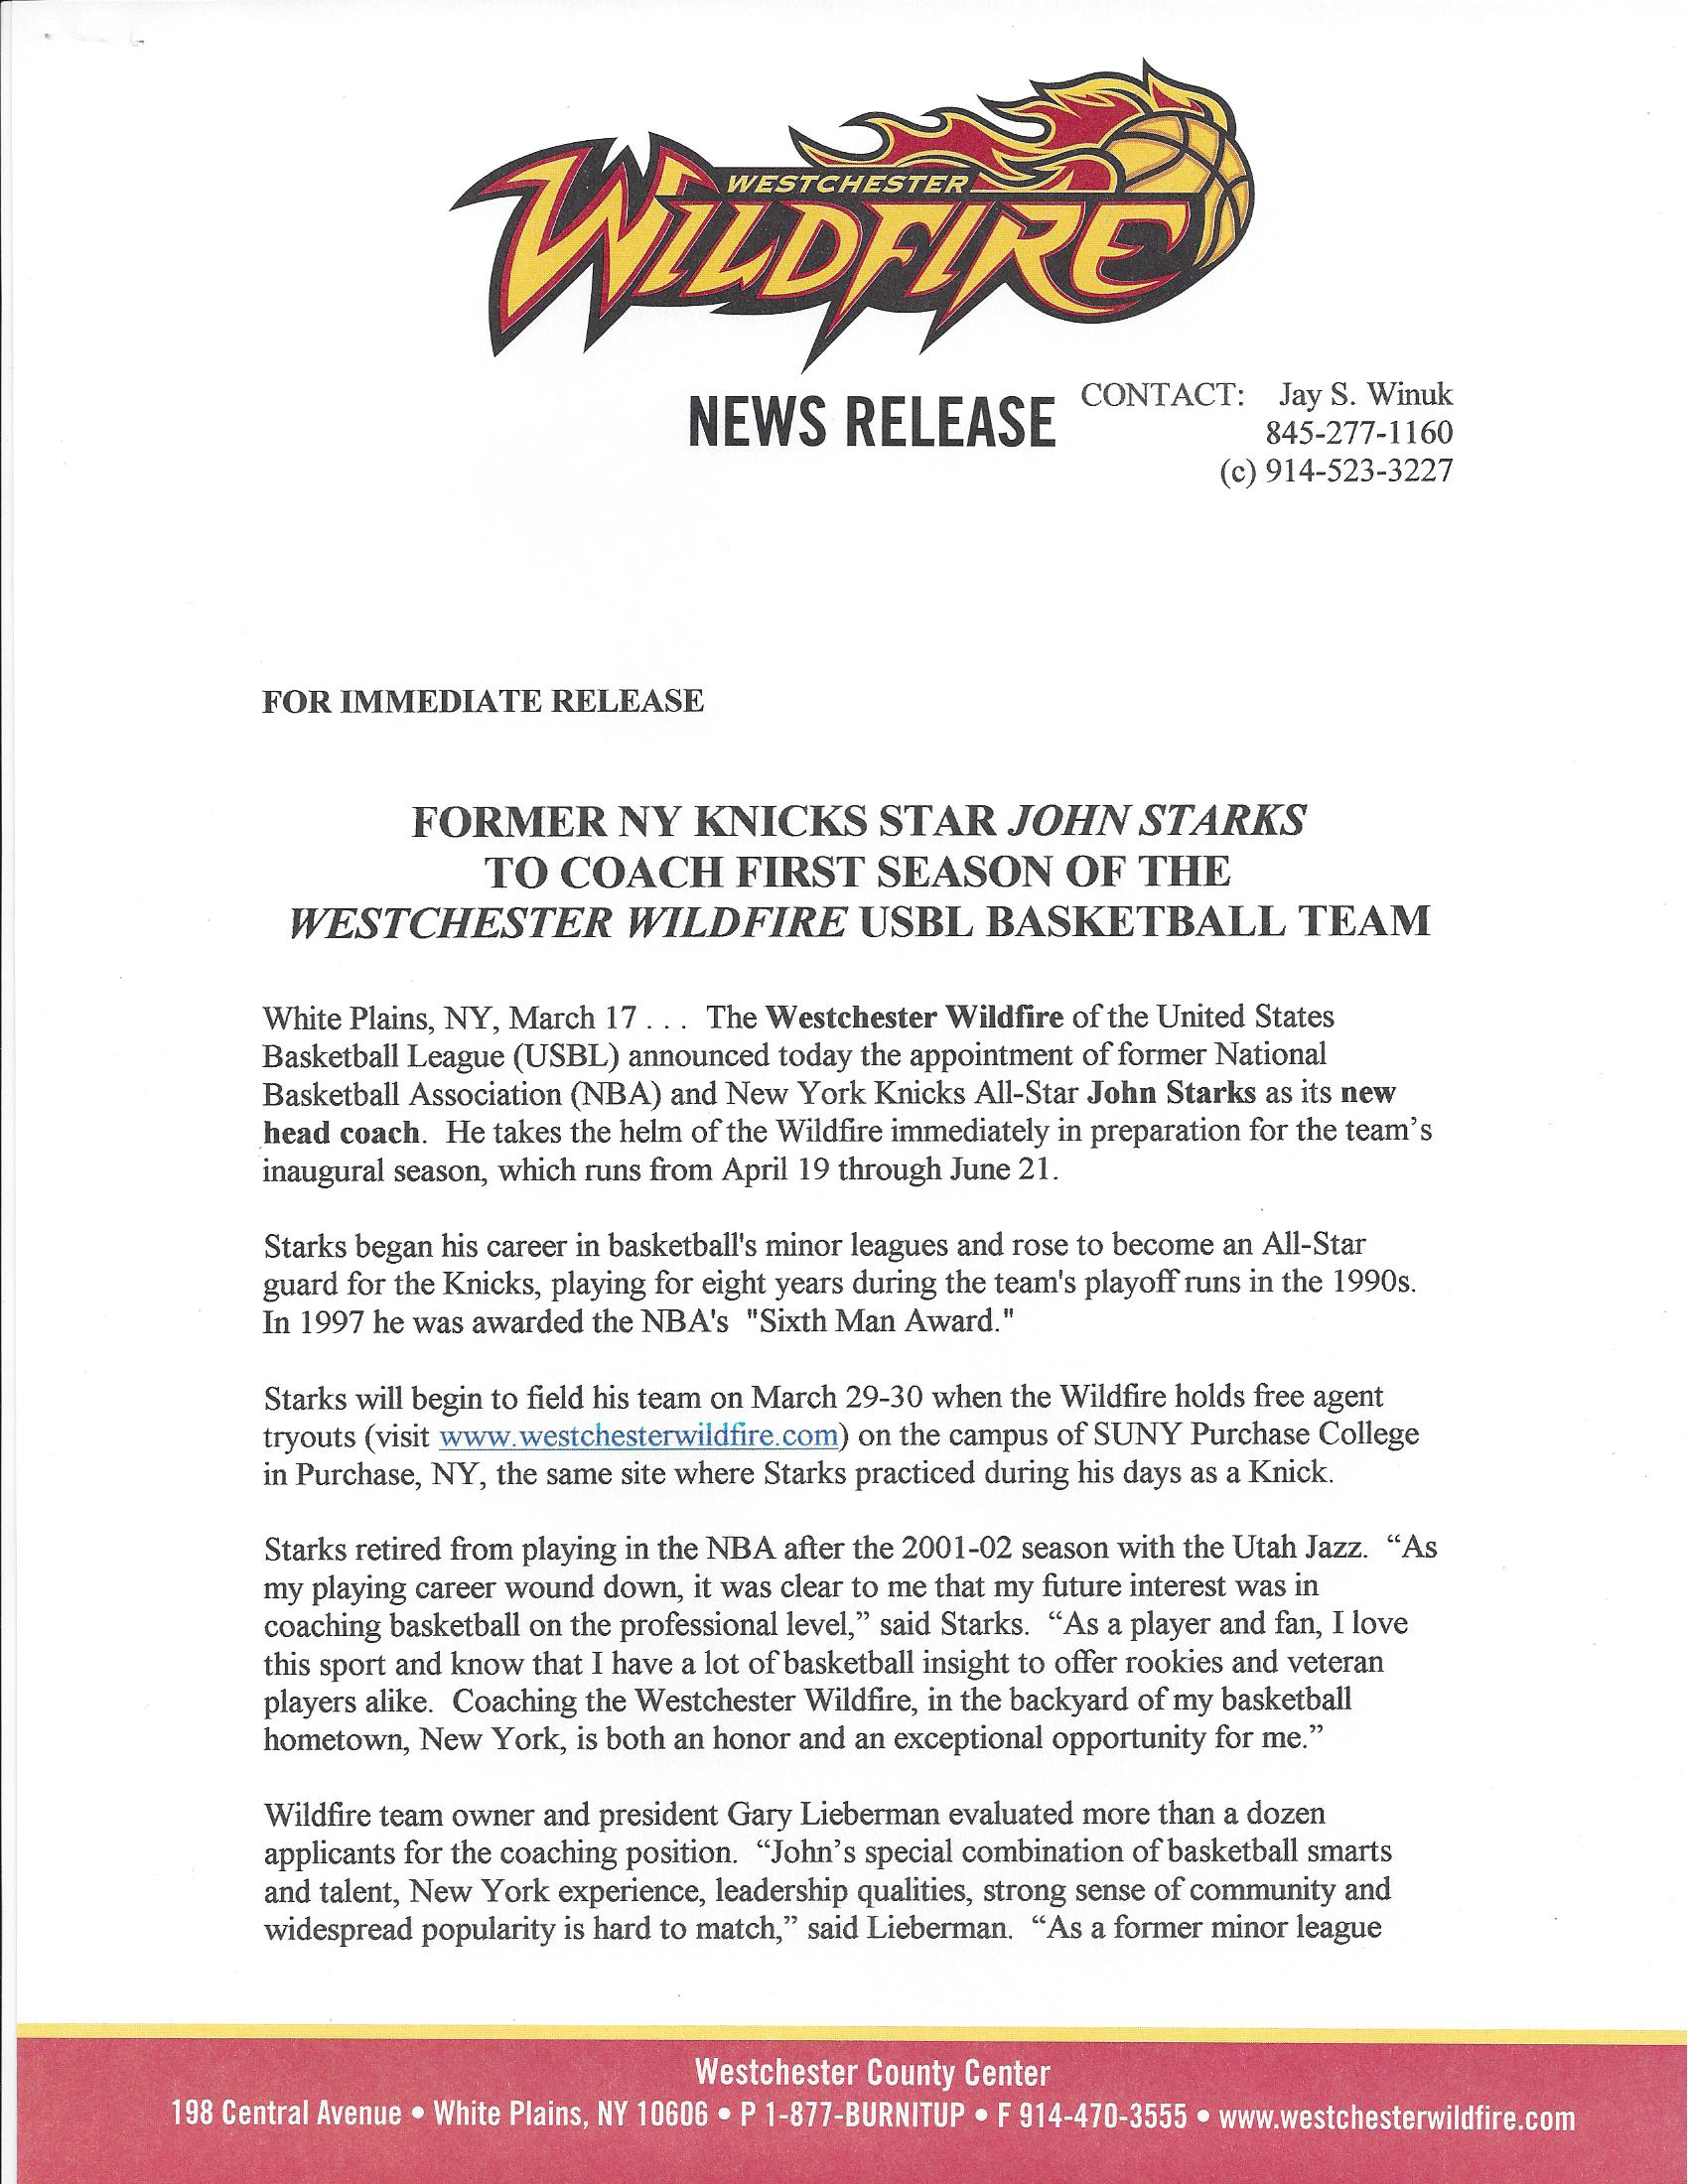 Westchester Wildfire images-press release.png